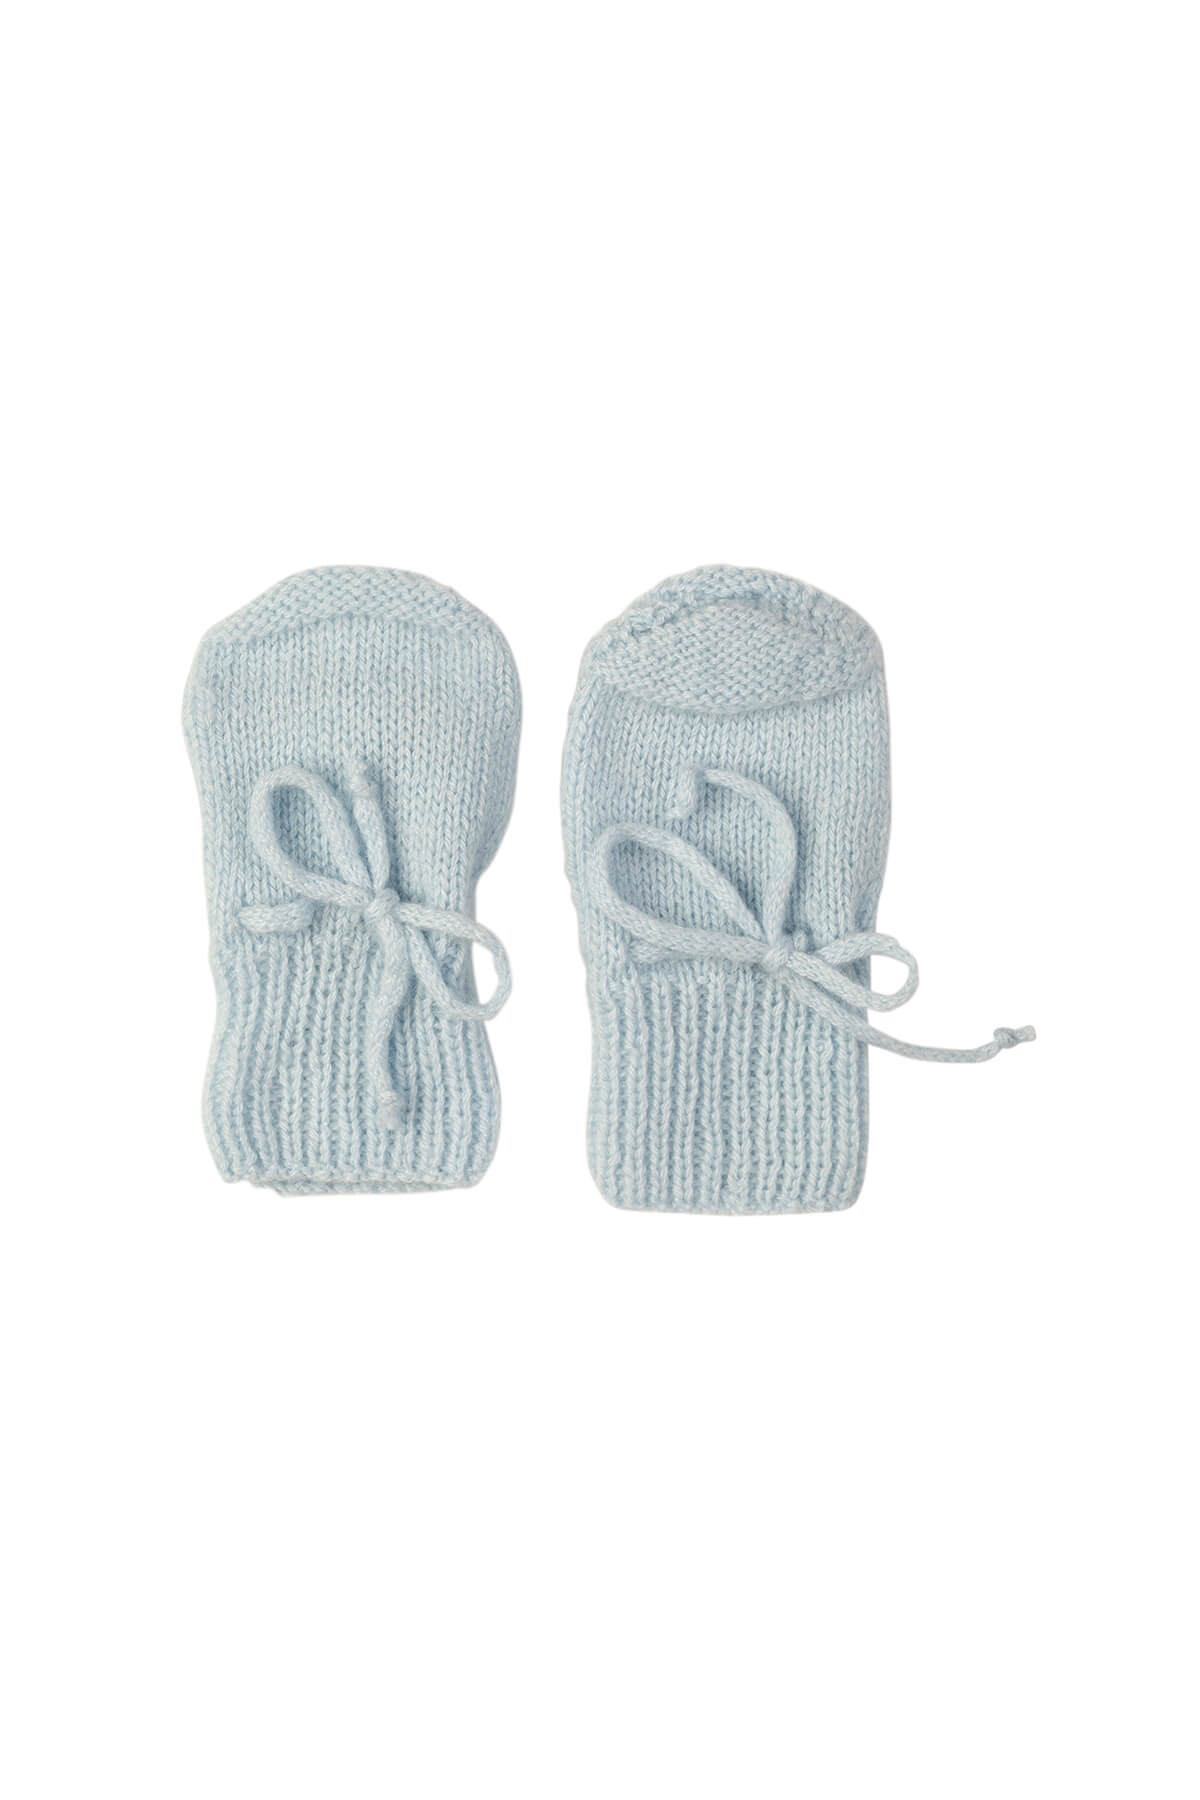 Johnstons of Elgin Hand Knitted Cashmere Baby Mittens in Powder Blue on white background 617102809ONE